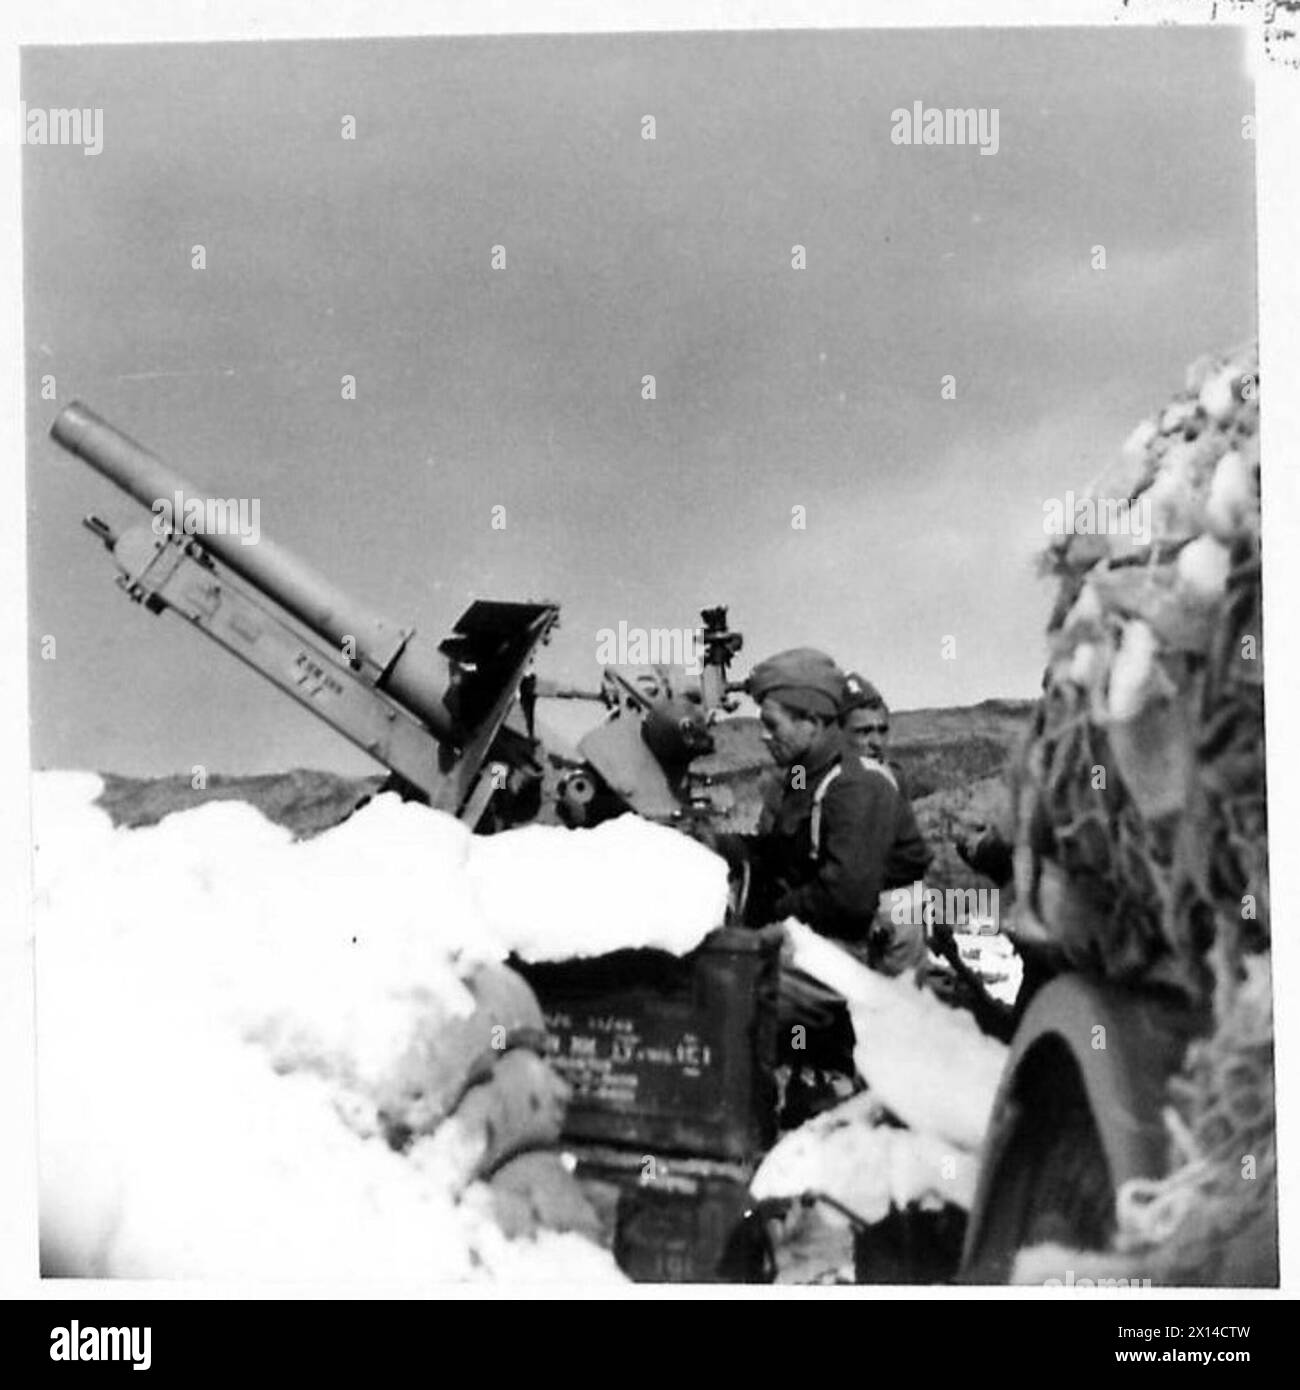 THE POLISH ARMY IN THE ITALIAN CAMPAIGN, 1943-1945 - Gunners of the 2nd Battery, 1st Carpathian Light Artillery Regiment (3rd Carpathian Rifles Division, 2nd Polish Corps)manning a Ordnance QF 25 pounder gun in Rionero in Vulture area, 10 February 1944 Polish Army, Polish Armed Forces in the West, Polish Corps, II, Polish Armed Forces in the West, Carpathian Rifles Divisior, 3, Polish Armed Forces in the West, 2nd Corps, 3rd Carpathian Rifles Division, 1st Carpathian Light Artillery Regiment Stock Photo